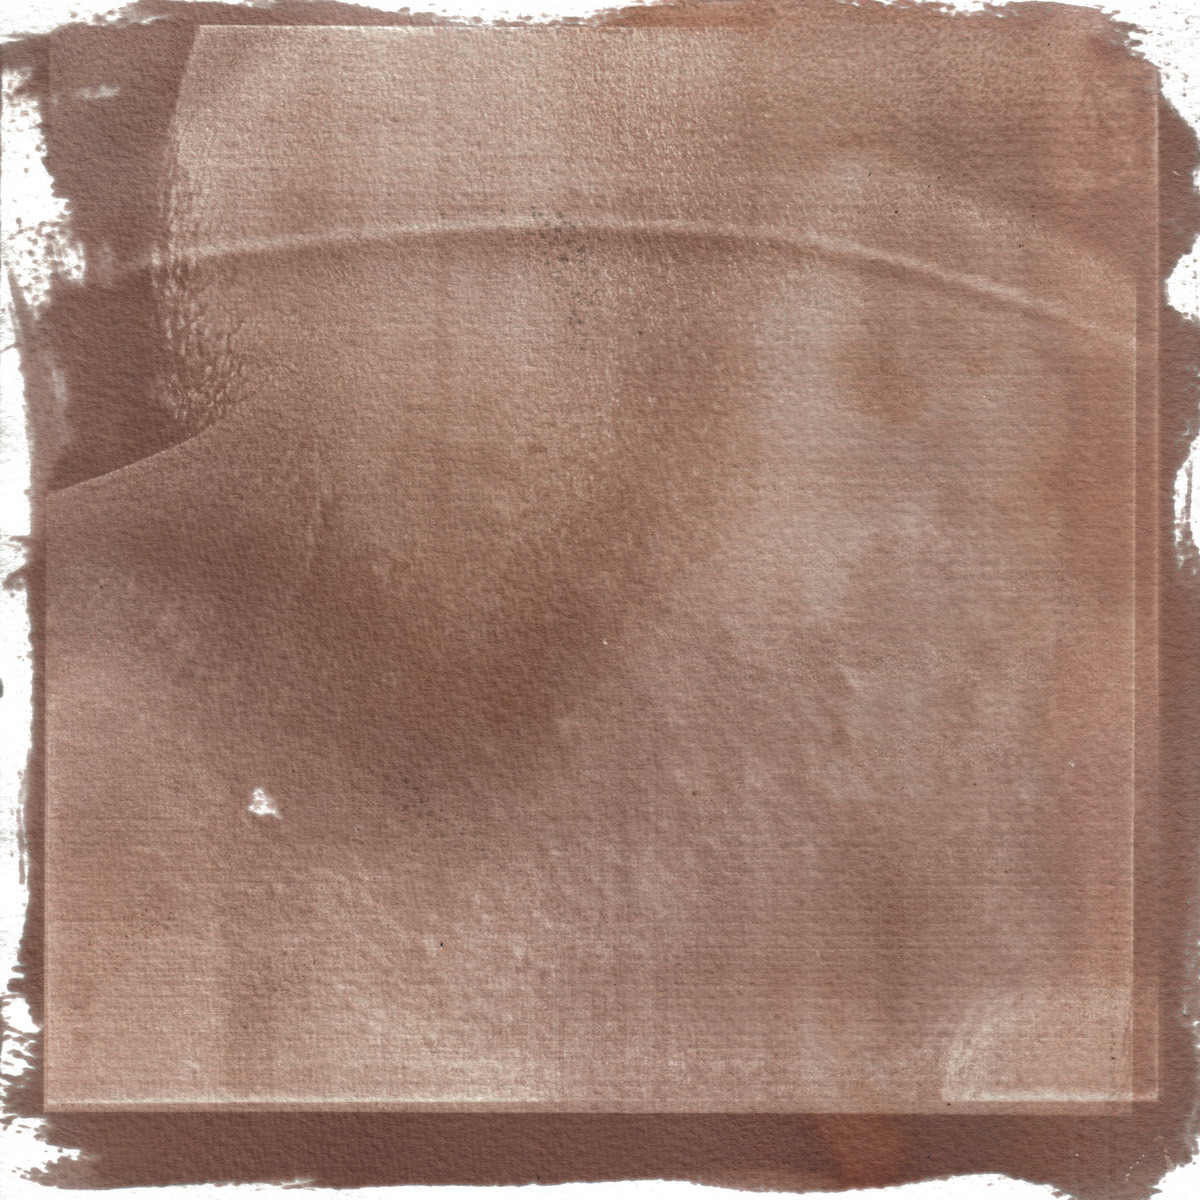 talbotype salted paper salt paper calotype talbotipo calotipo abstract male man body Landscape skin sun print